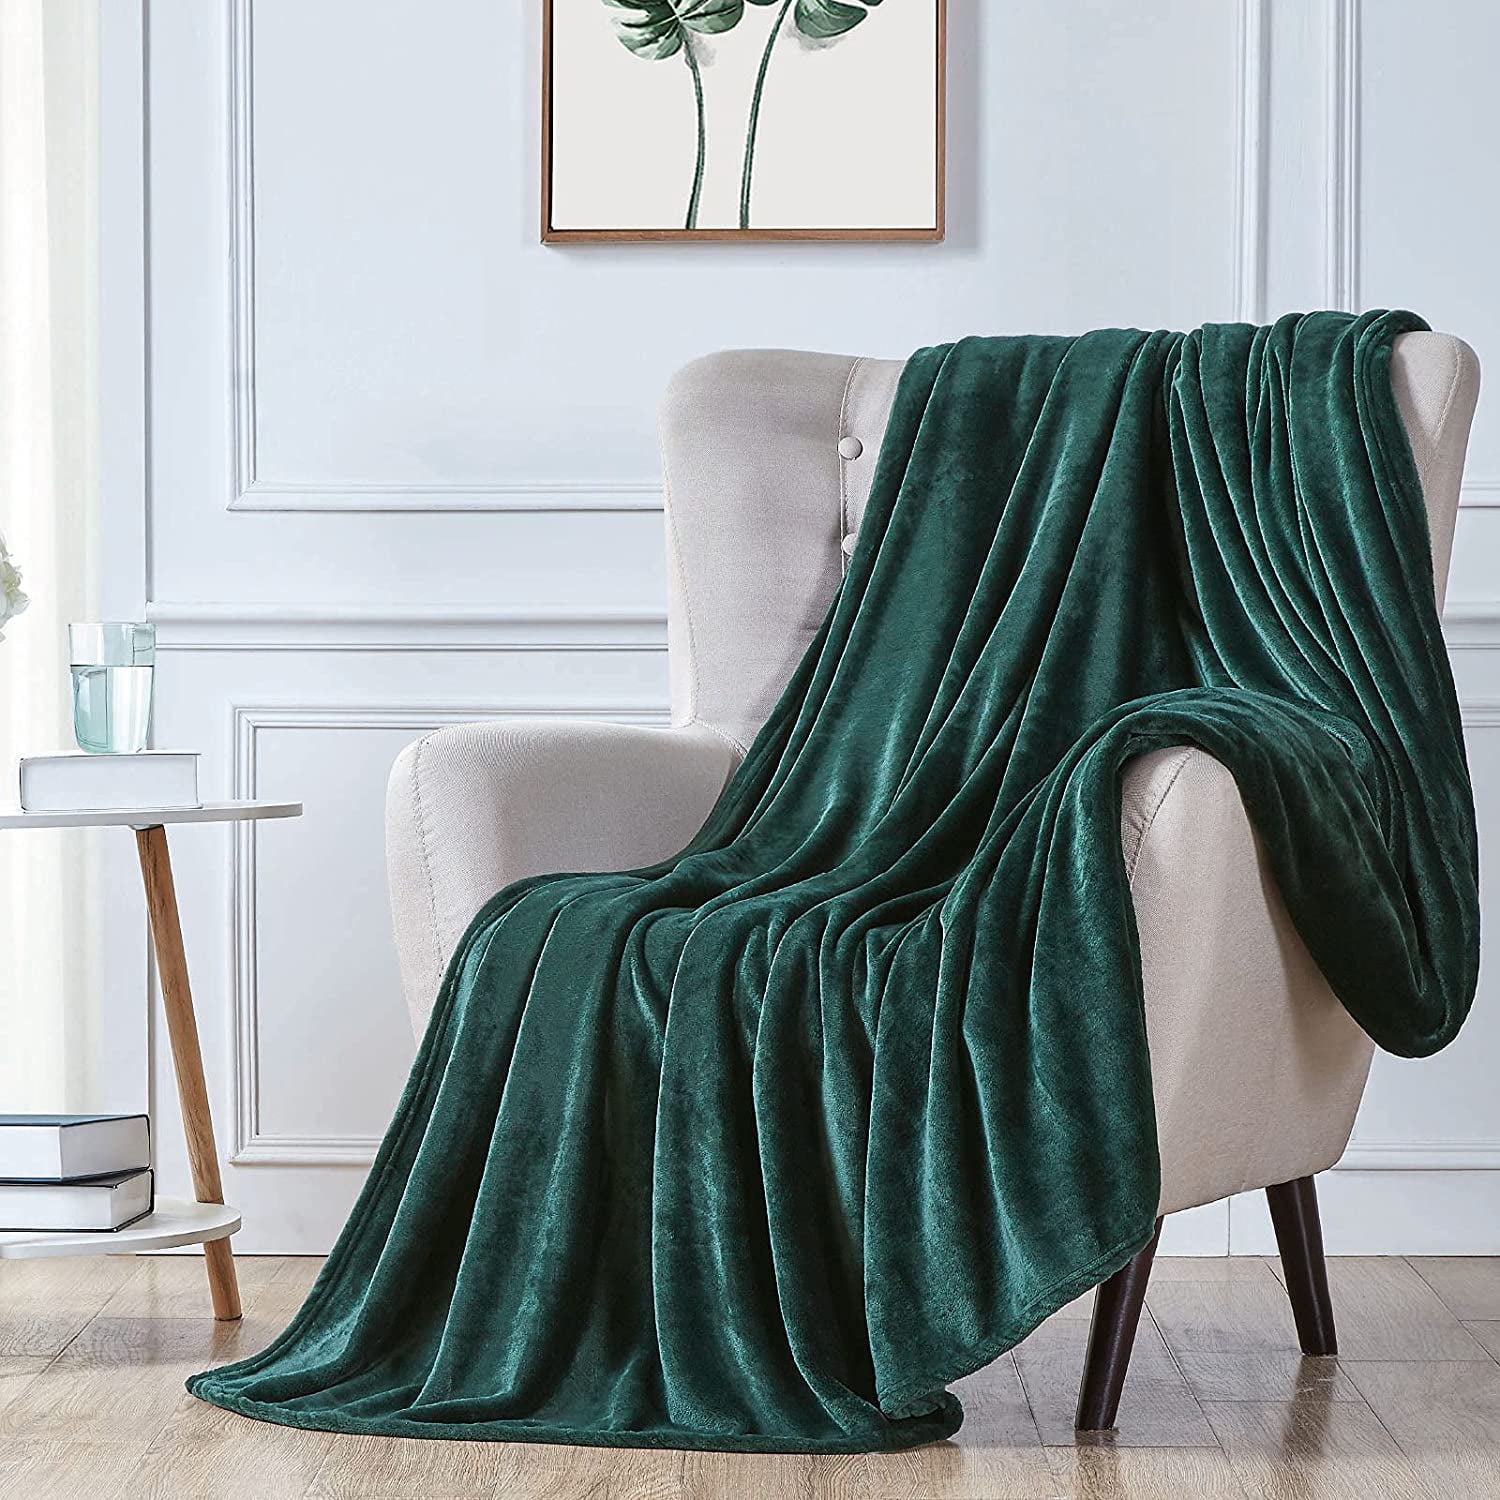 Green 50x60 Fleece Blankets Throw Size Green Throw Blankets for Couch Christmas Decorations Gifts for Women Cozy Bed Blankets Microfiber Dual Sided Fuzzy Throw Fit Sofa Thick Blanket Plush Warm